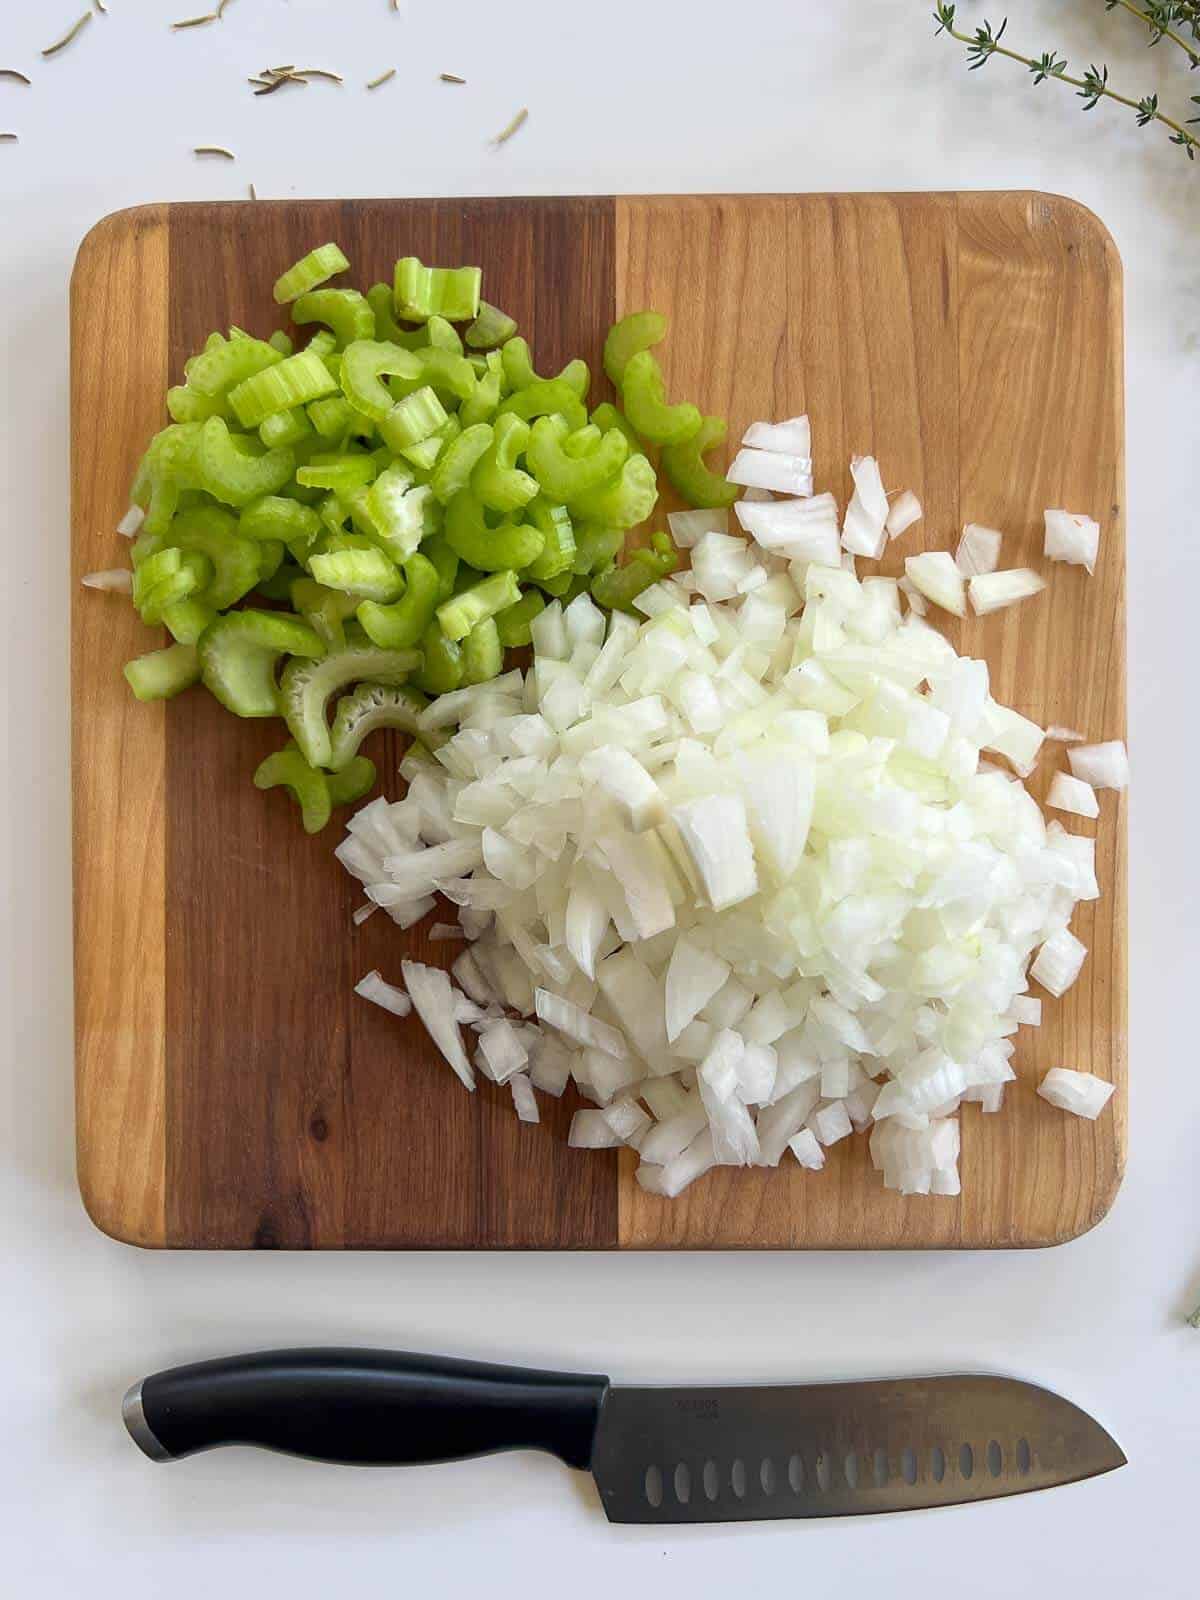 chopped onions and celery on a chopping board.